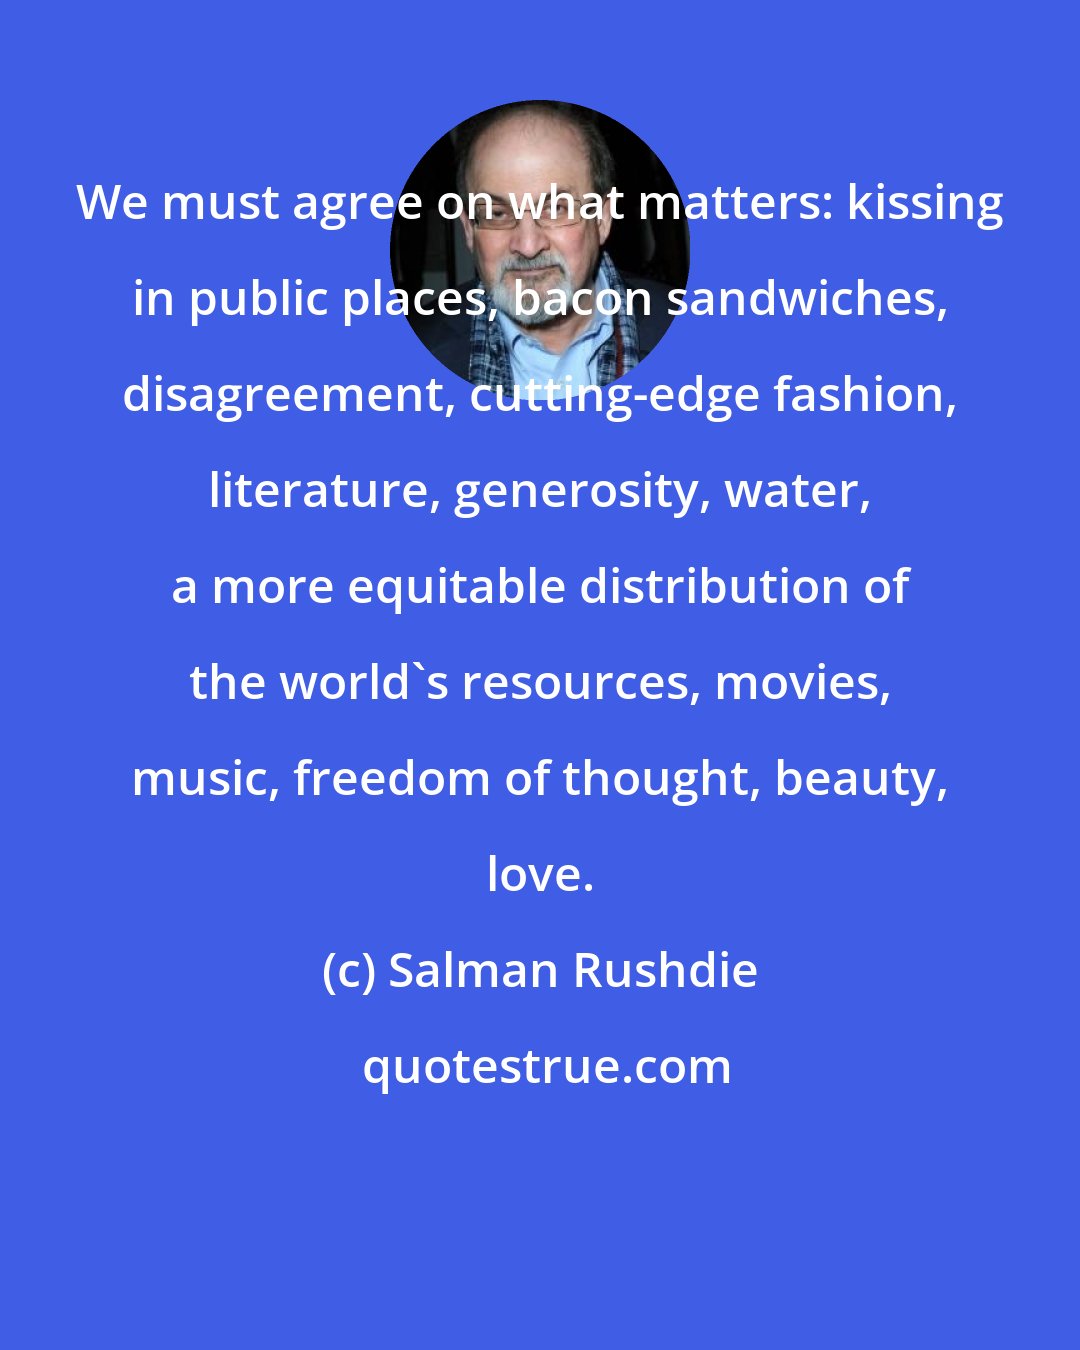 Salman Rushdie: We must agree on what matters: kissing in public places, bacon sandwiches, disagreement, cutting-edge fashion, literature, generosity, water, a more equitable distribution of the world's resources, movies, music, freedom of thought, beauty, love.